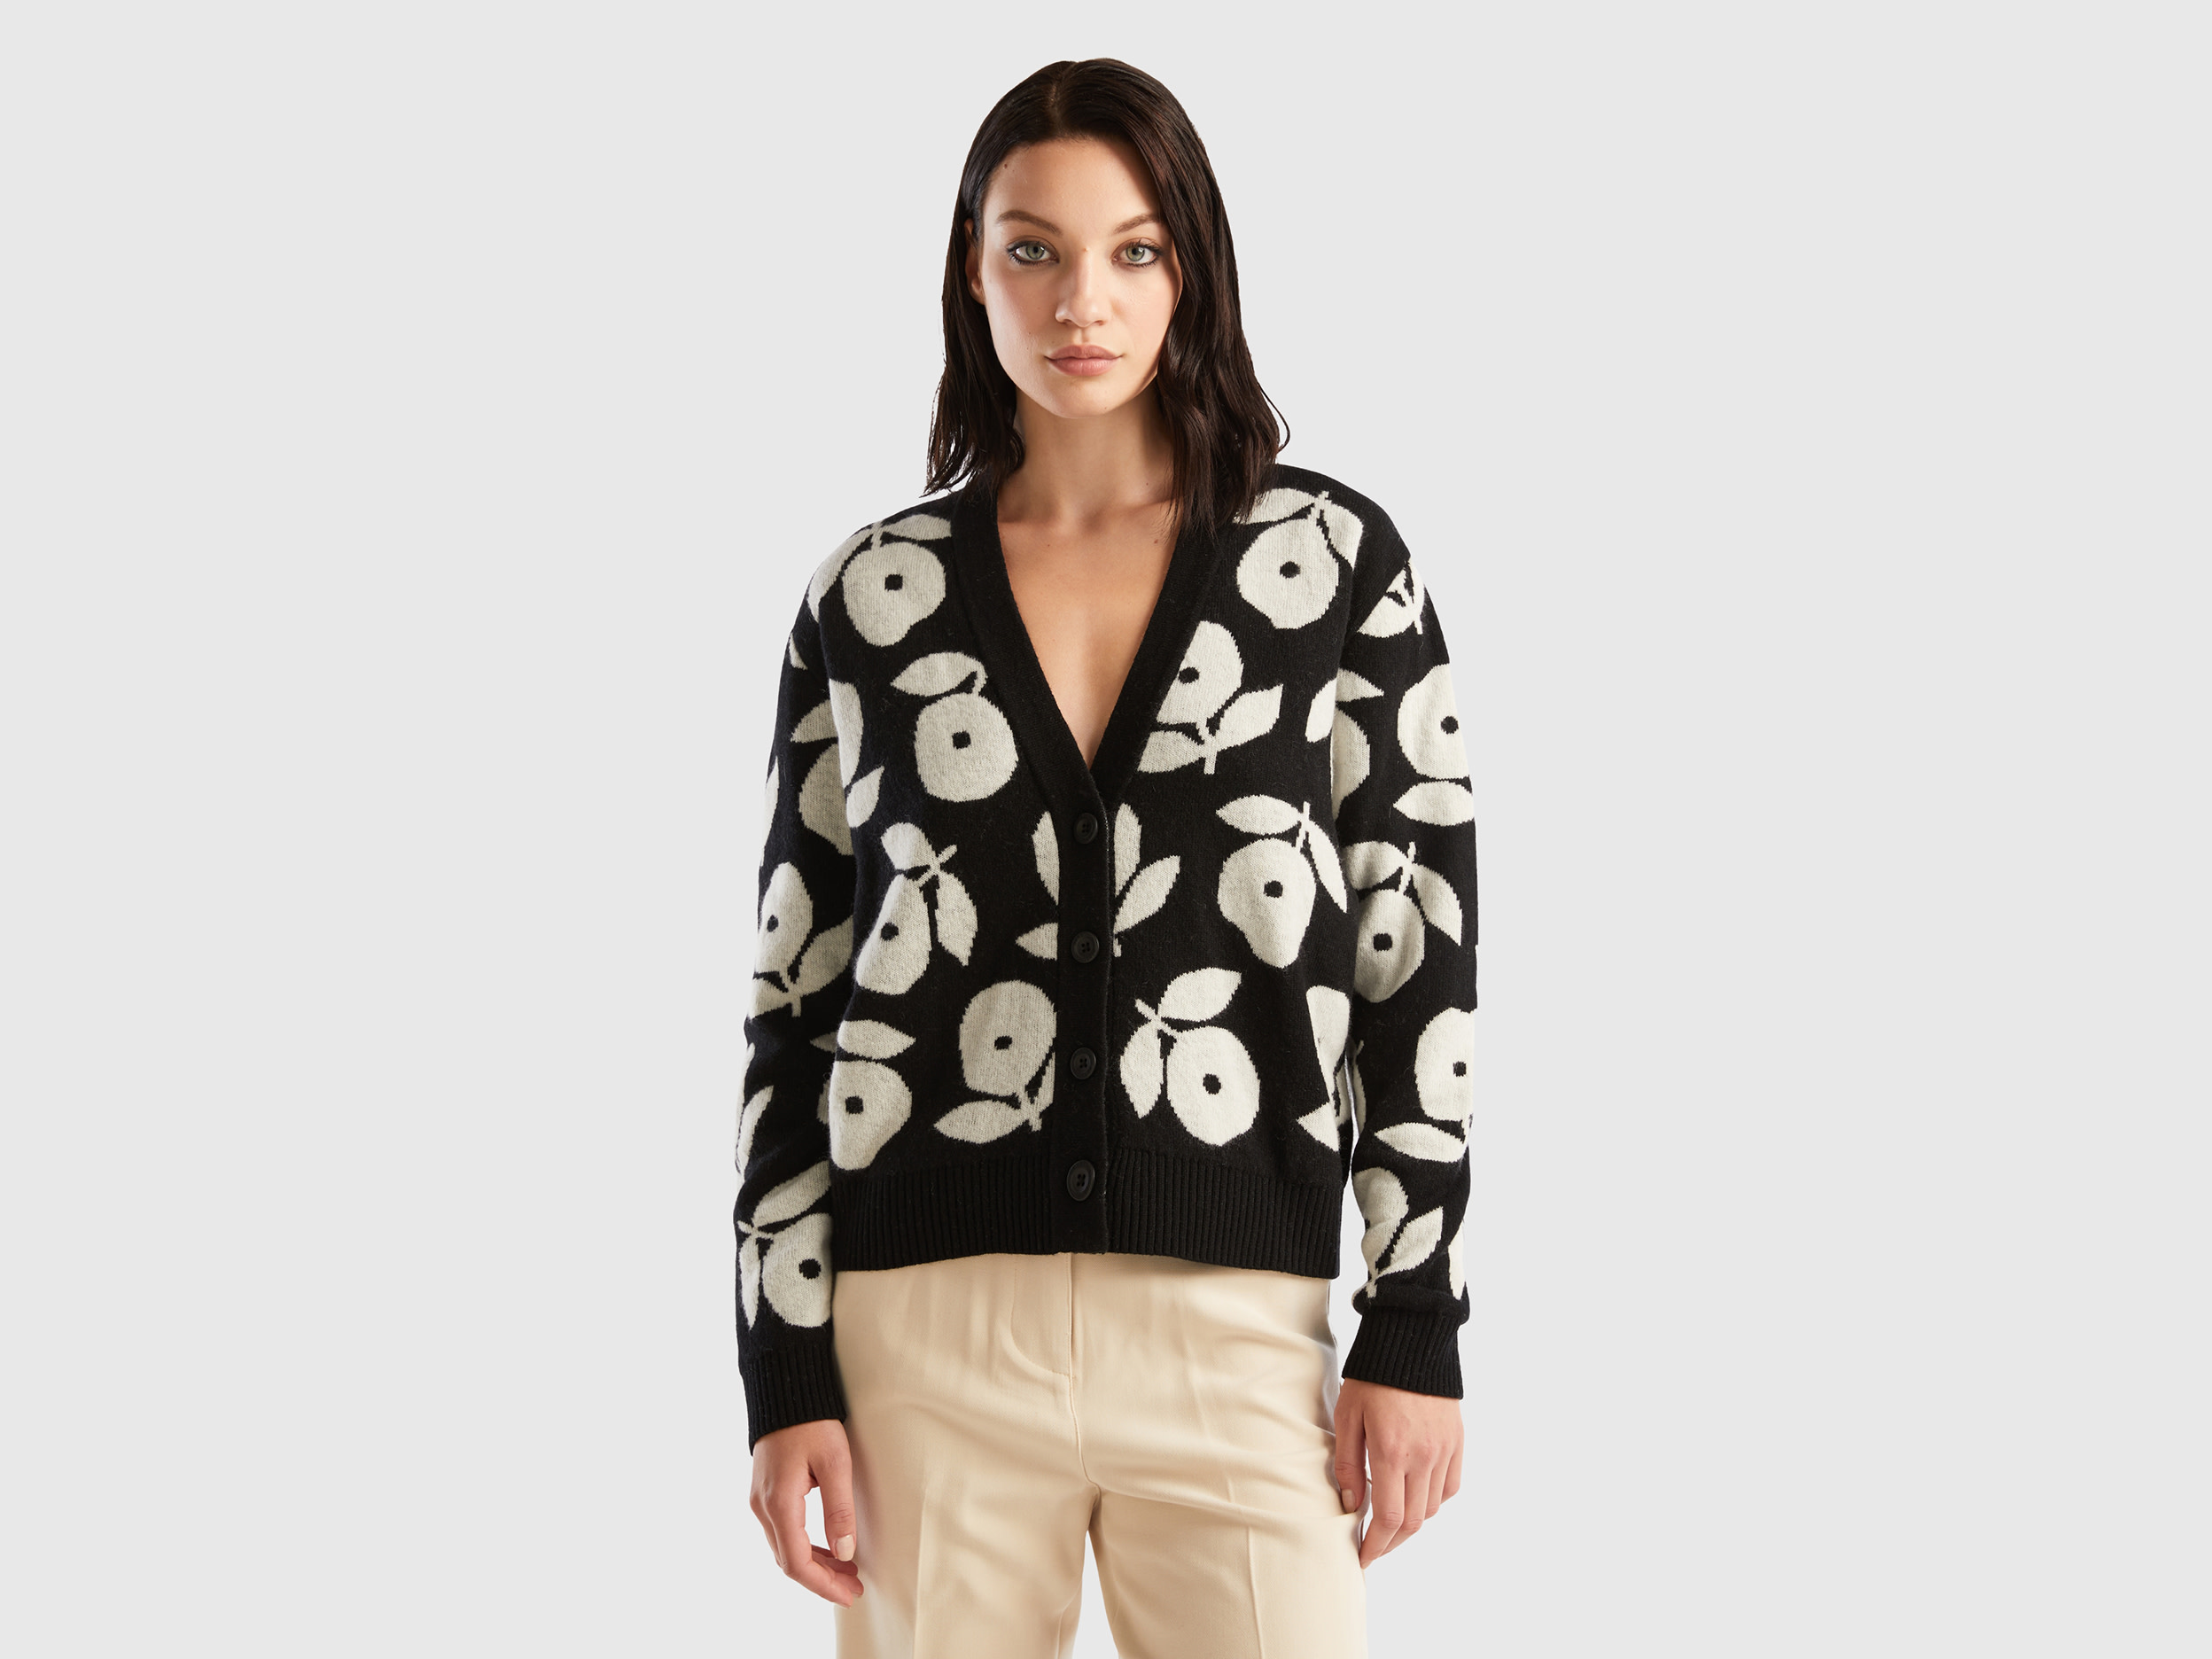 Benetton, Cardigan With Floral Inlays, size L-XL, Black, Women